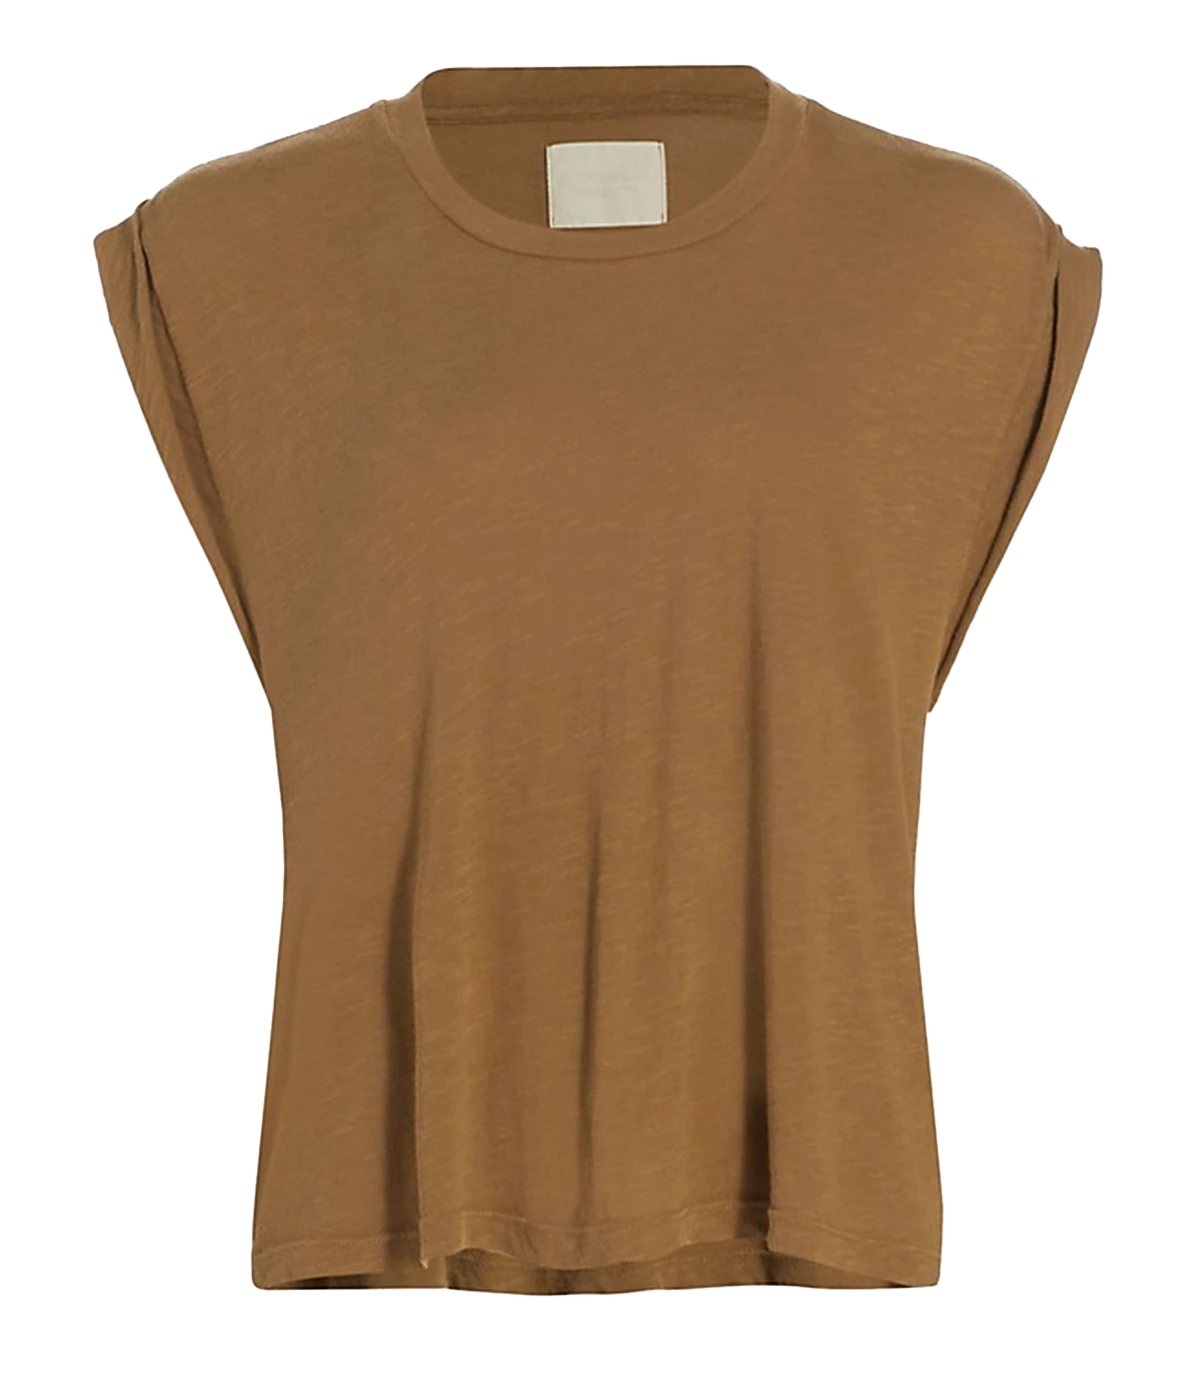 A elevated T-shirt in a brown colorway, featuring rolled sleeves, croped hem and muscle tank style. 100% cotton, comfortable, everyday basic, bra friendly, made in USA. 